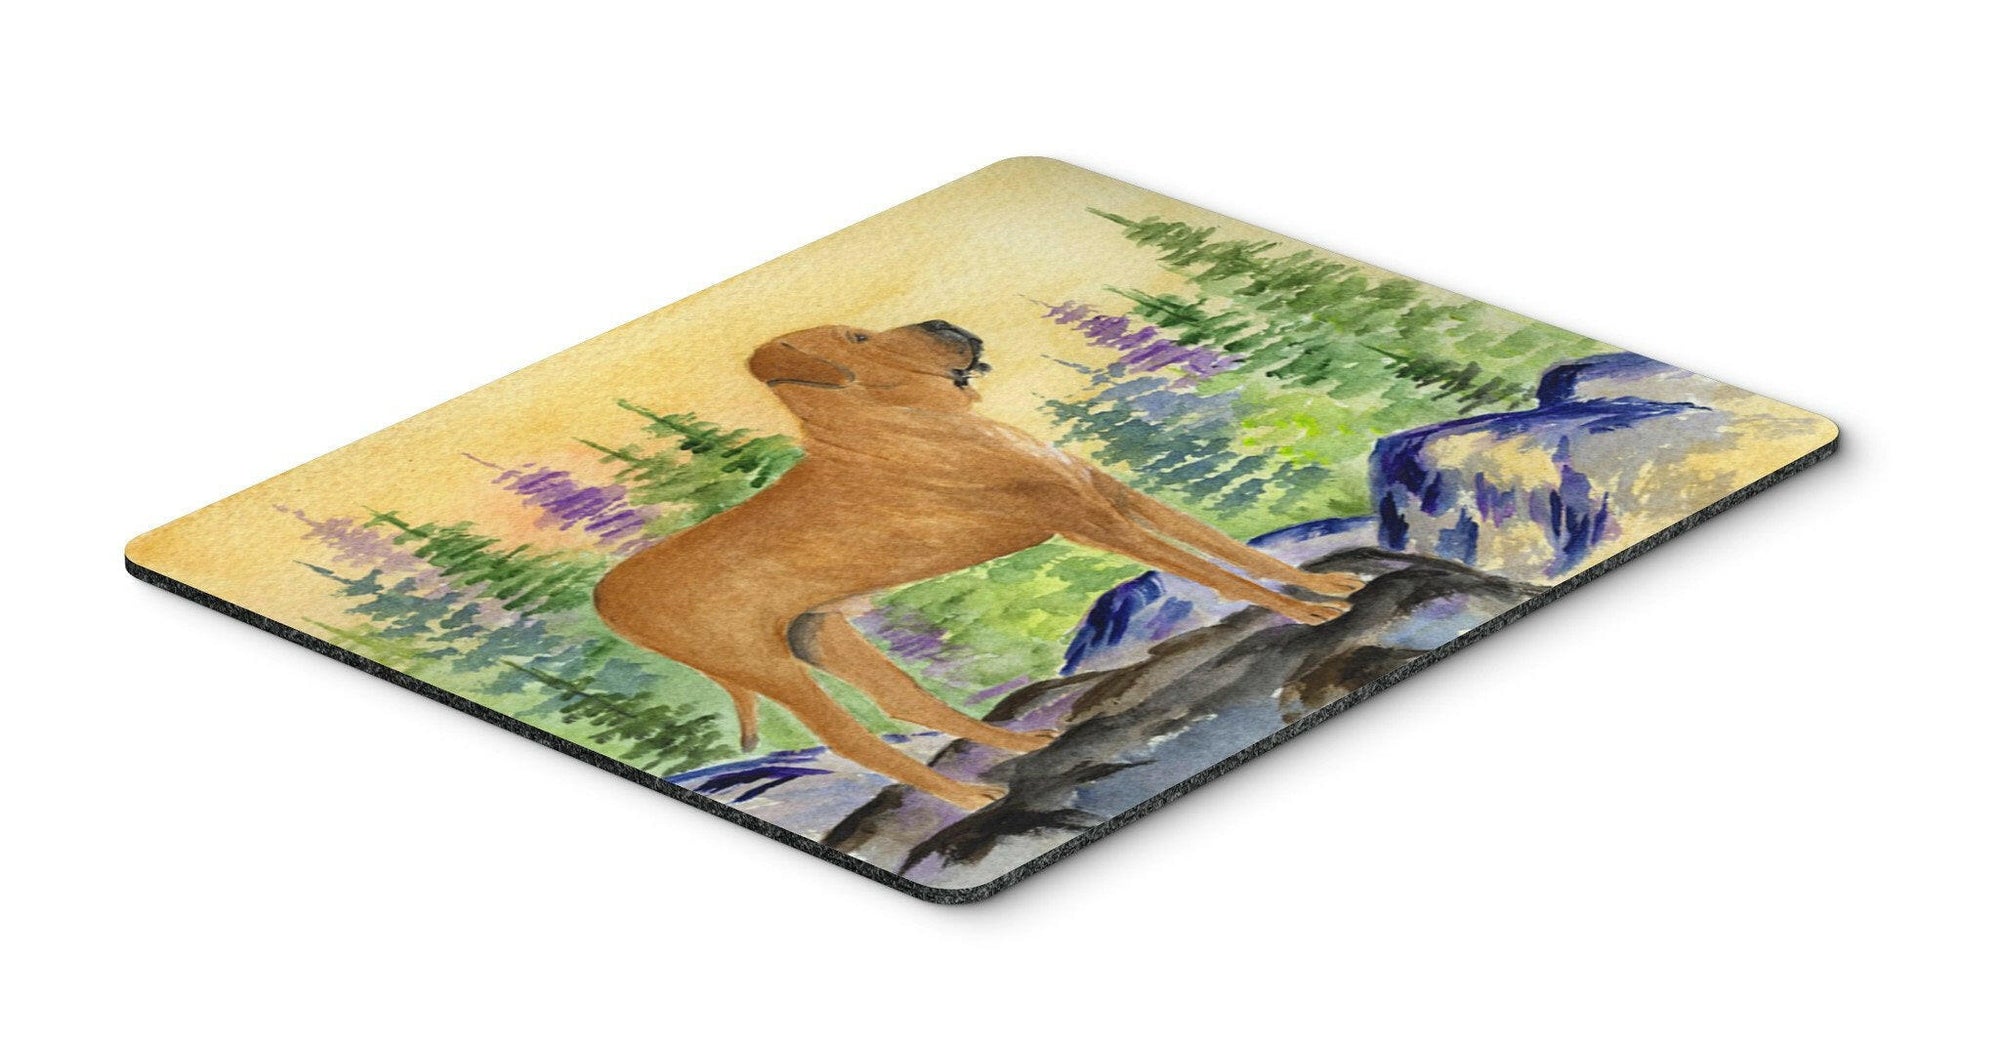 Tosa Inu Mouse Pad / Hot Pad / Trivet by Caroline's Treasures